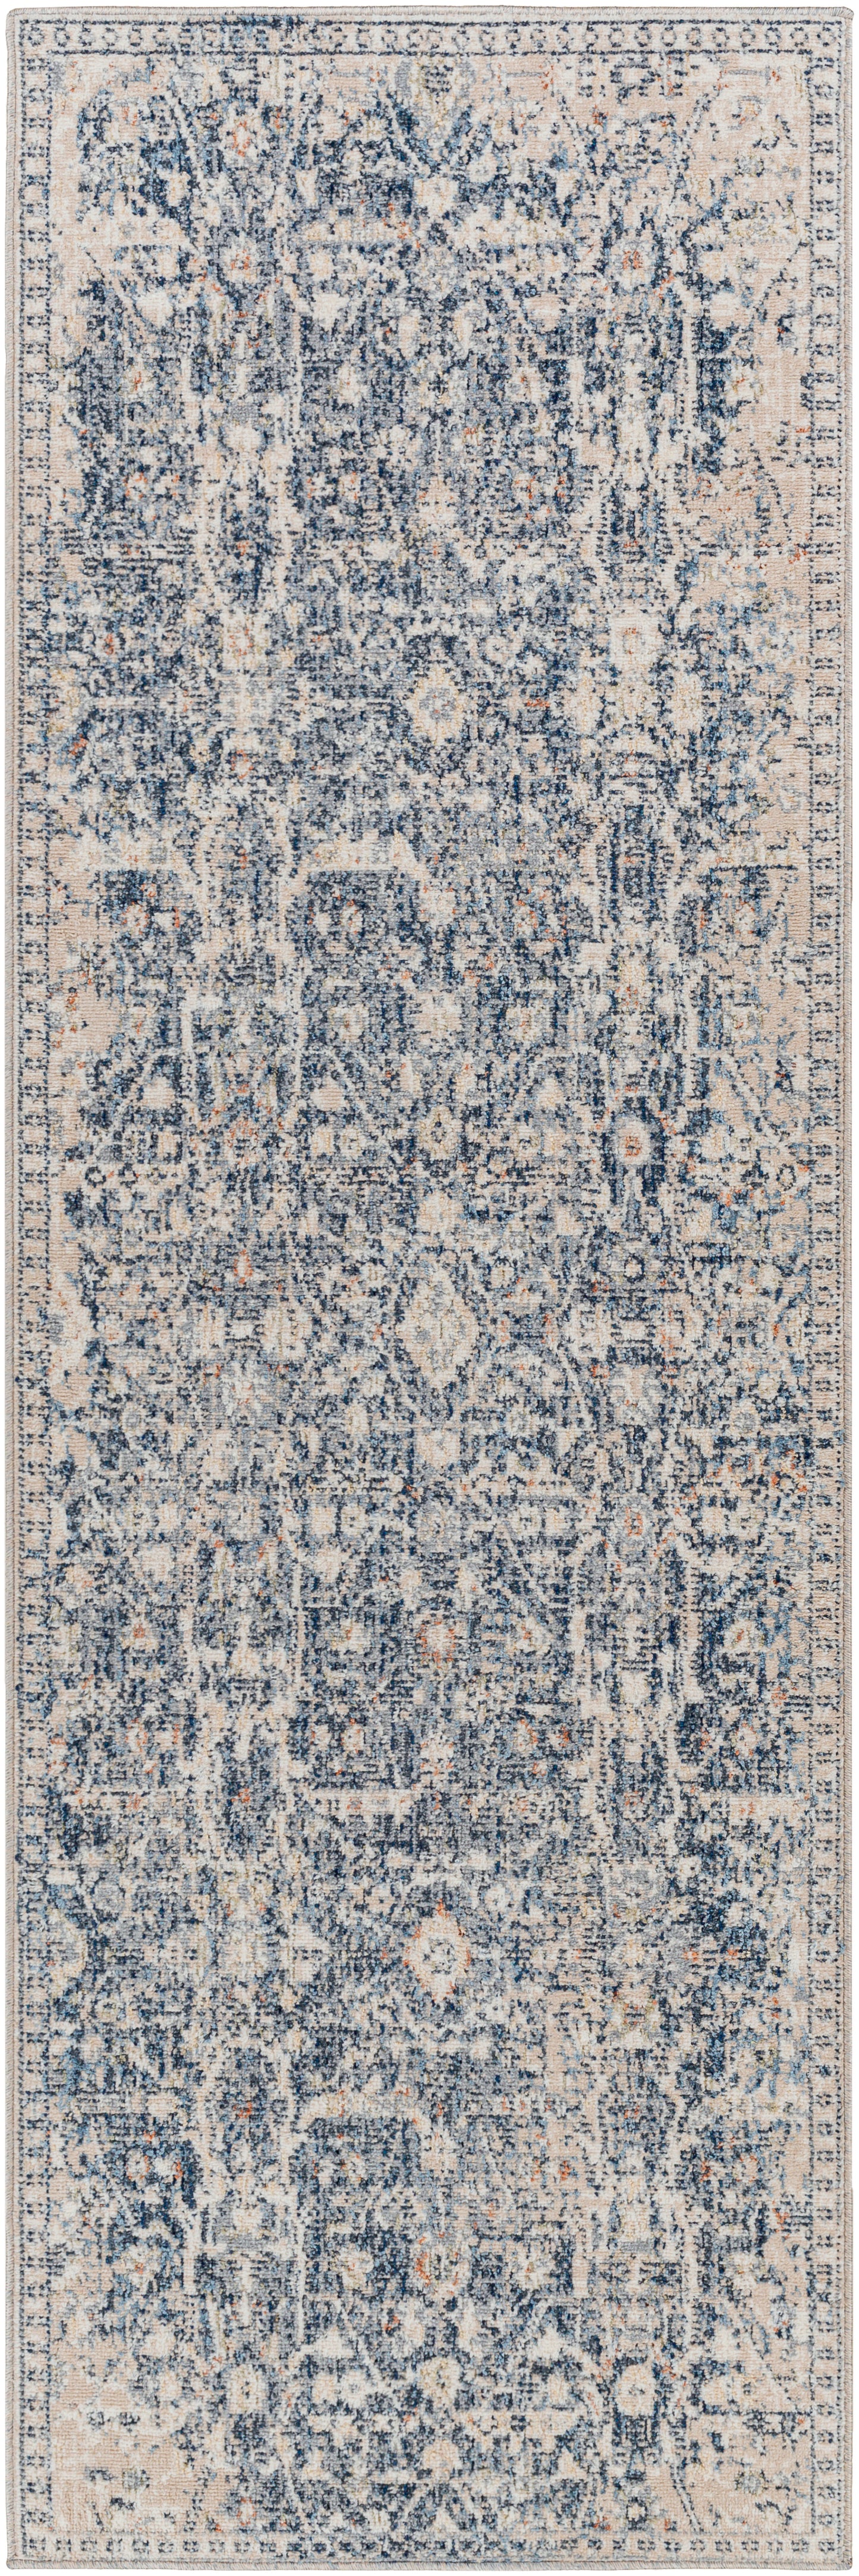 Amore 29651 Machine Woven Synthetic Blend Indoor Area Rug by Surya Rugs